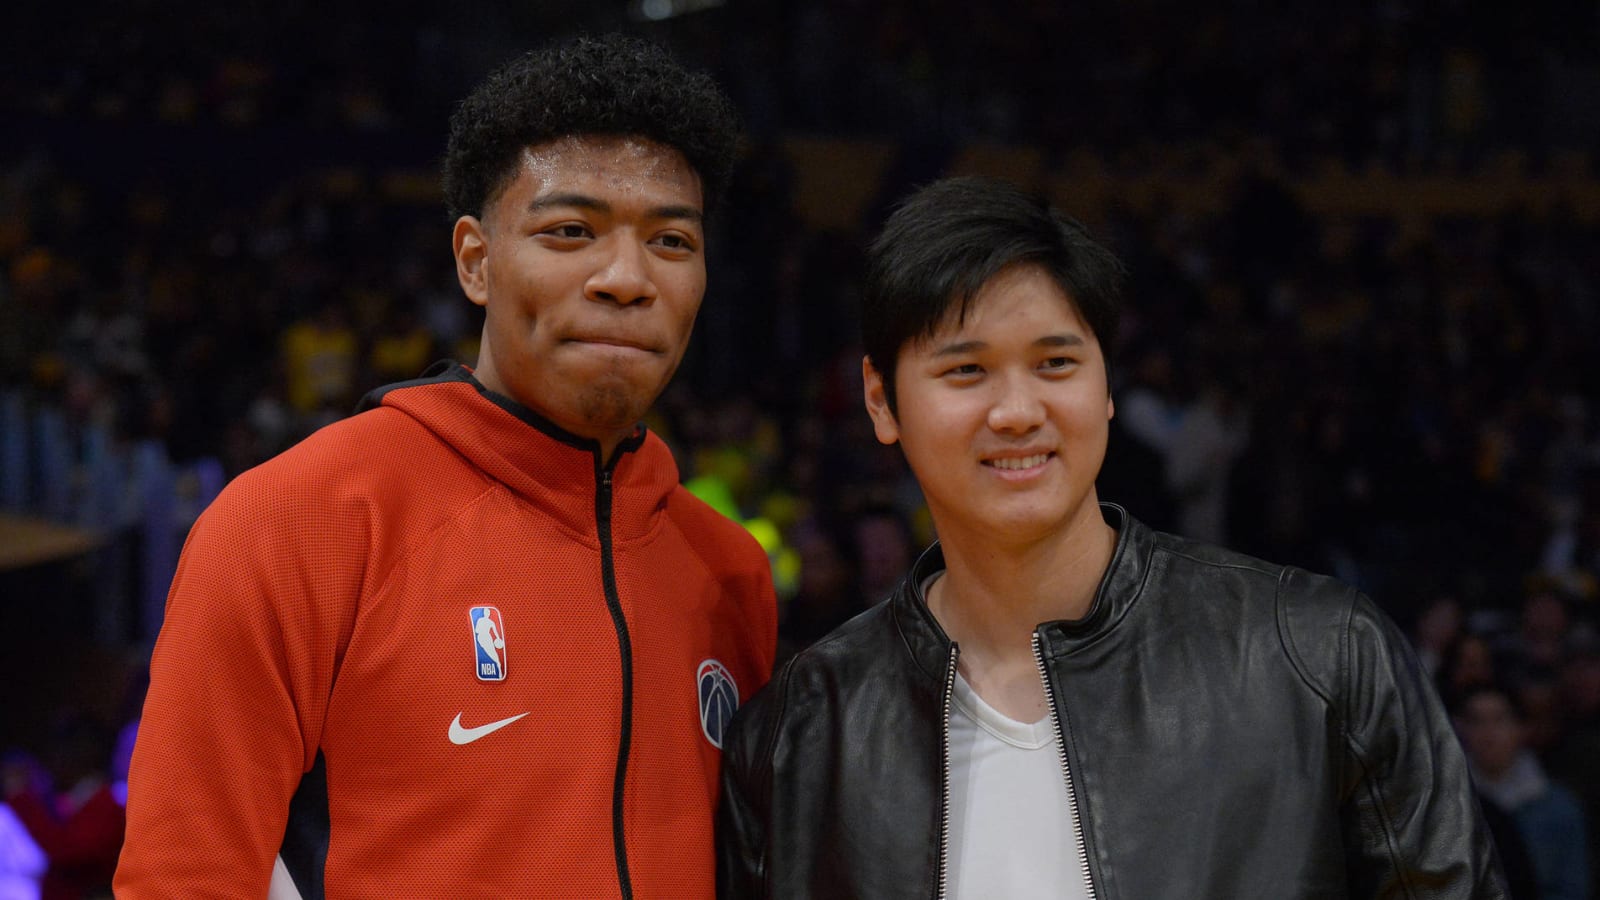 Shohei Ohtani watches fellow Japanese athlete Rui Hachimura at Lakers-Wizards game